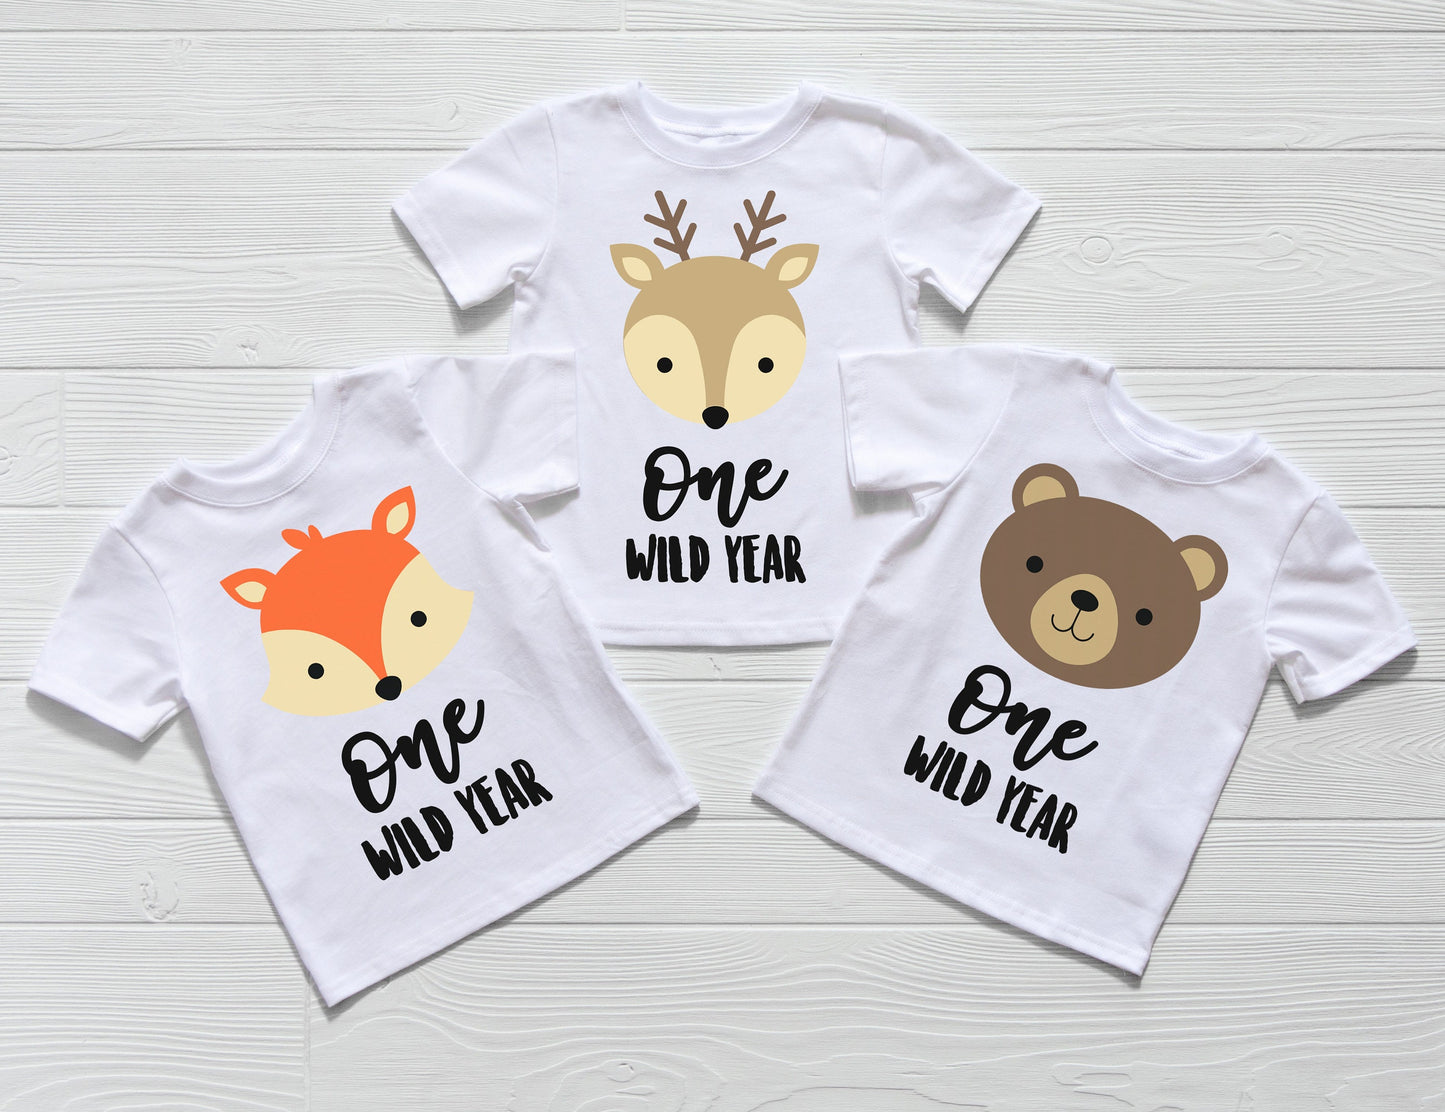 One Wild Year Infant or Toddler Shirt or Bodysuit - Choose an Animal - Cute Toddler Shirt - Wild One Birthday Party - Forest animals